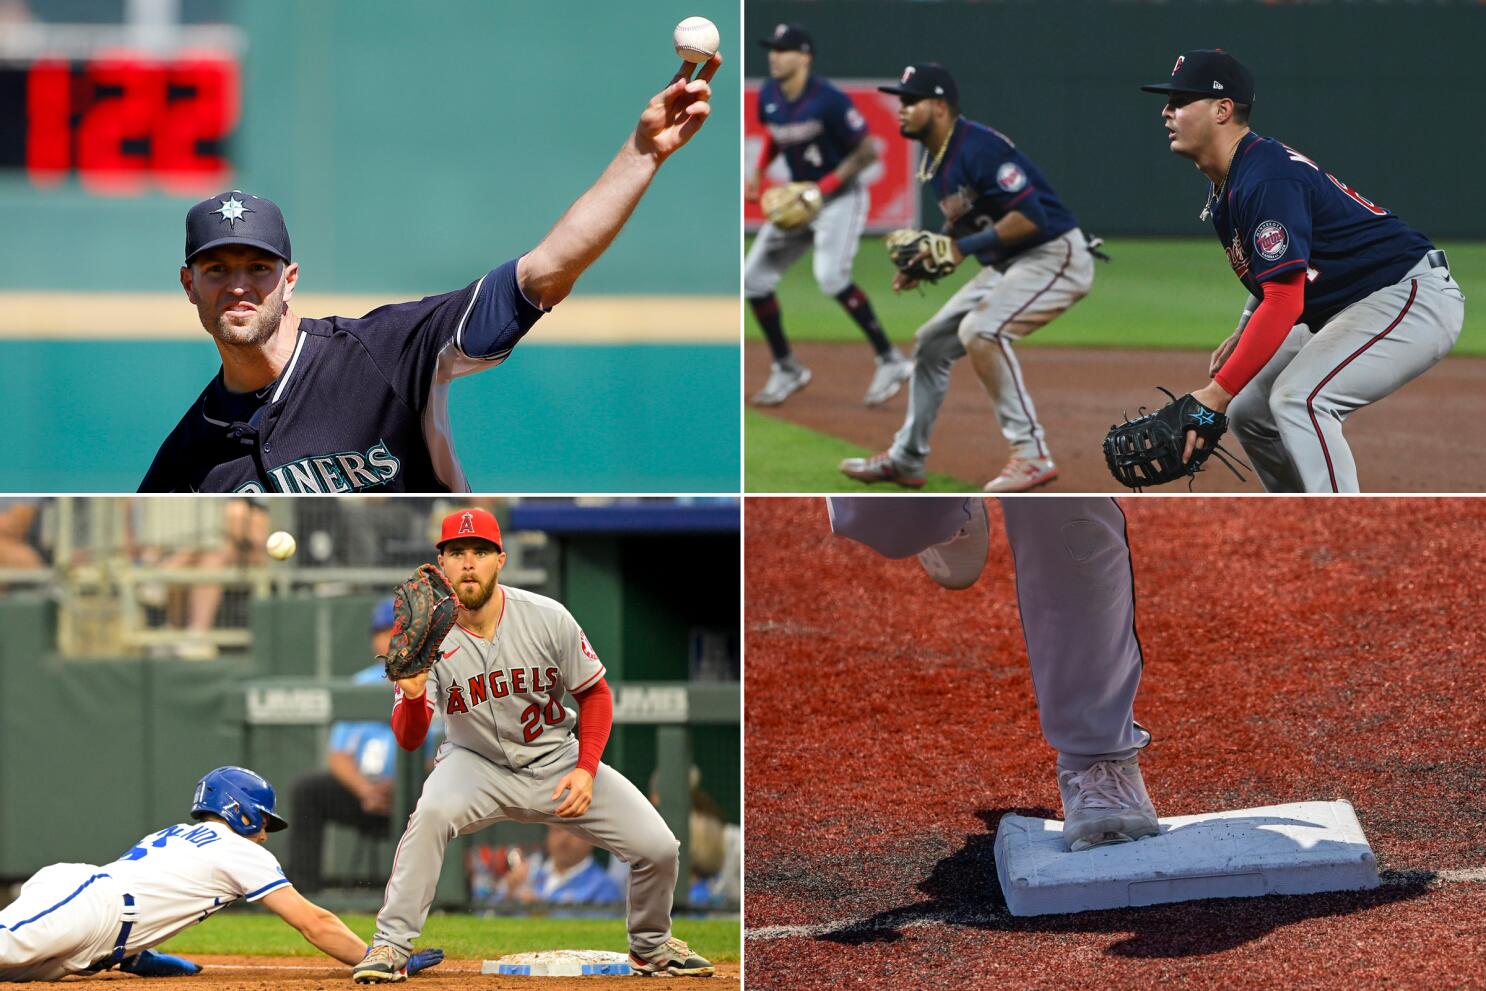 Red Sox uniforms will be unaffected by new MLB rules in 2023 